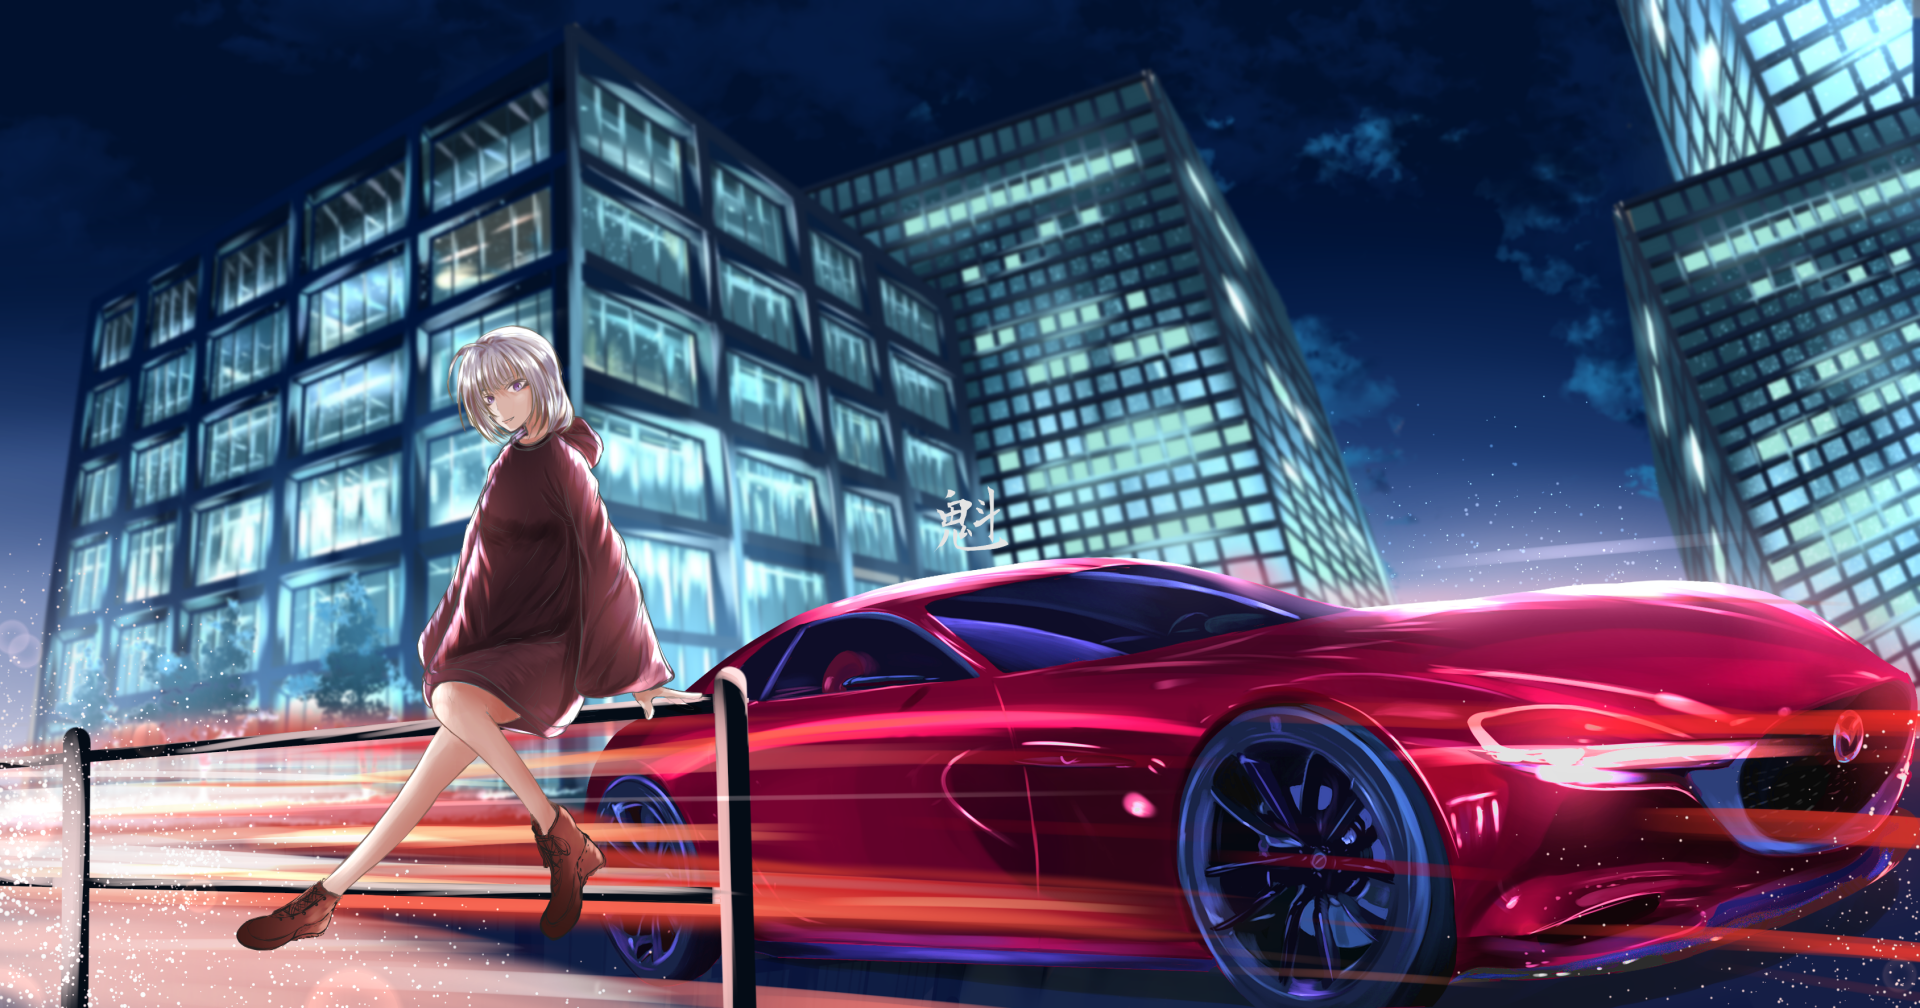 Download City Night Anime Car HD Wallpaper by ツチヤ